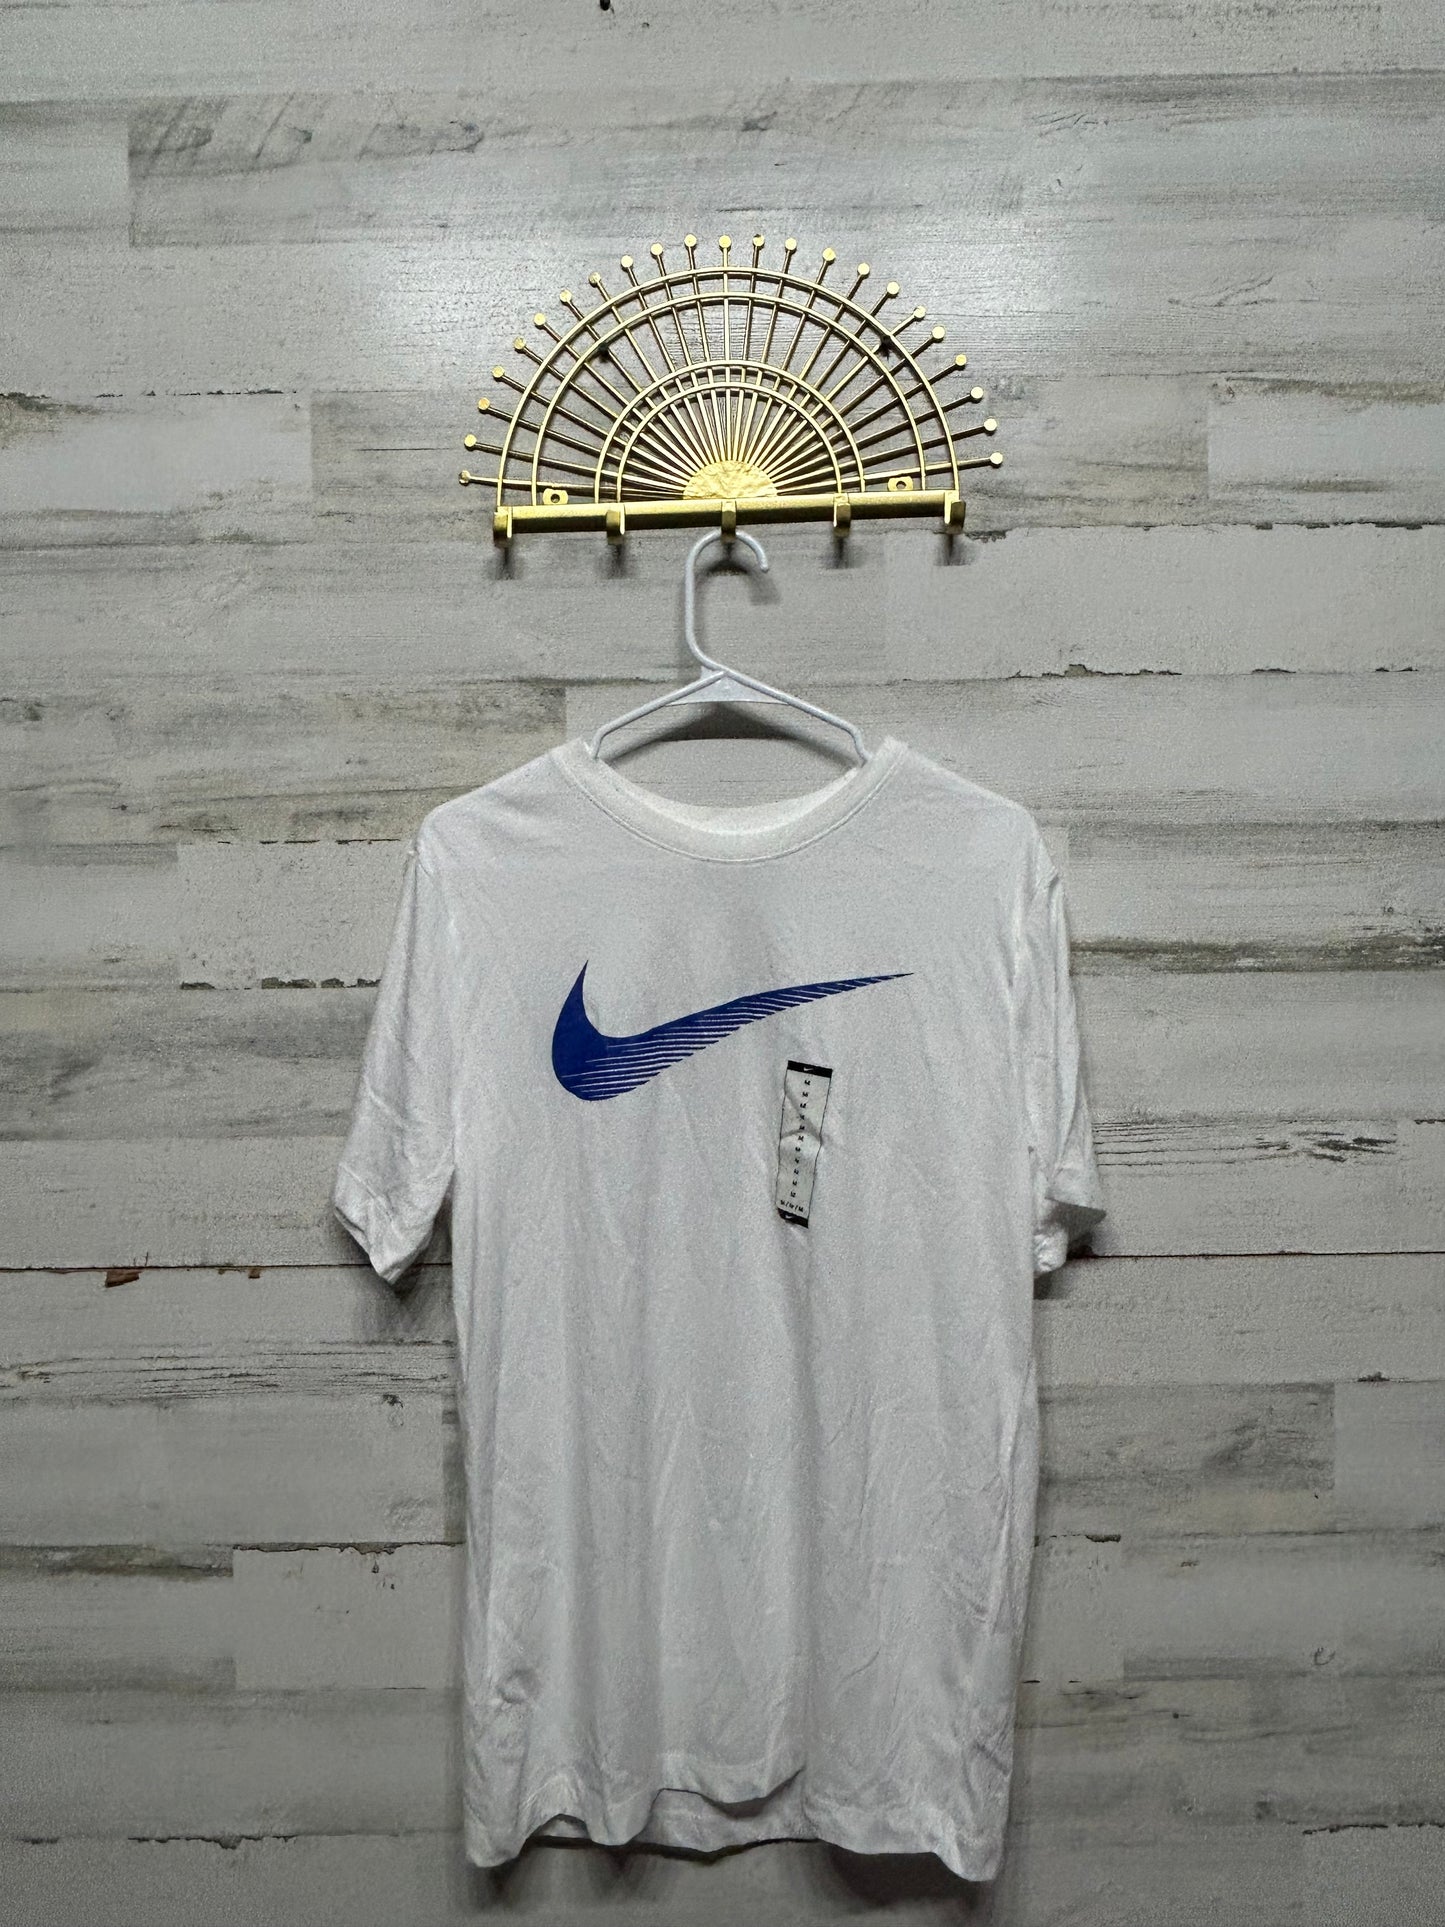 Men's Size Medium Nike White/Blue Shirt - New With Tags